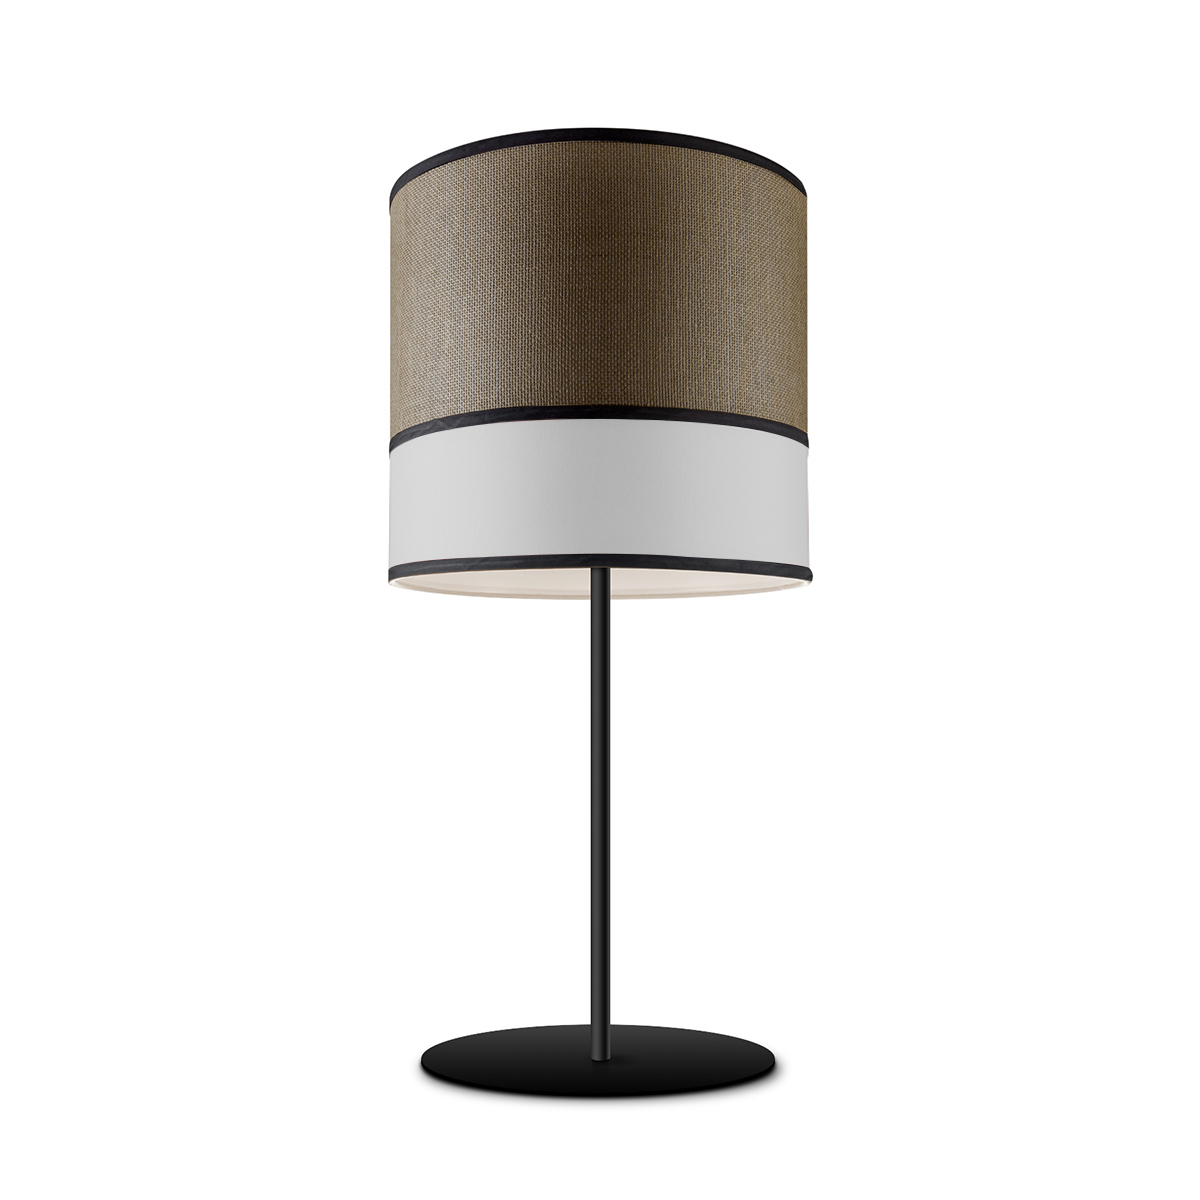 Tangla lighting - TLT7012-25WT - LED table lamp 1 Light - metal and paper and TC fabric in white - night - E27